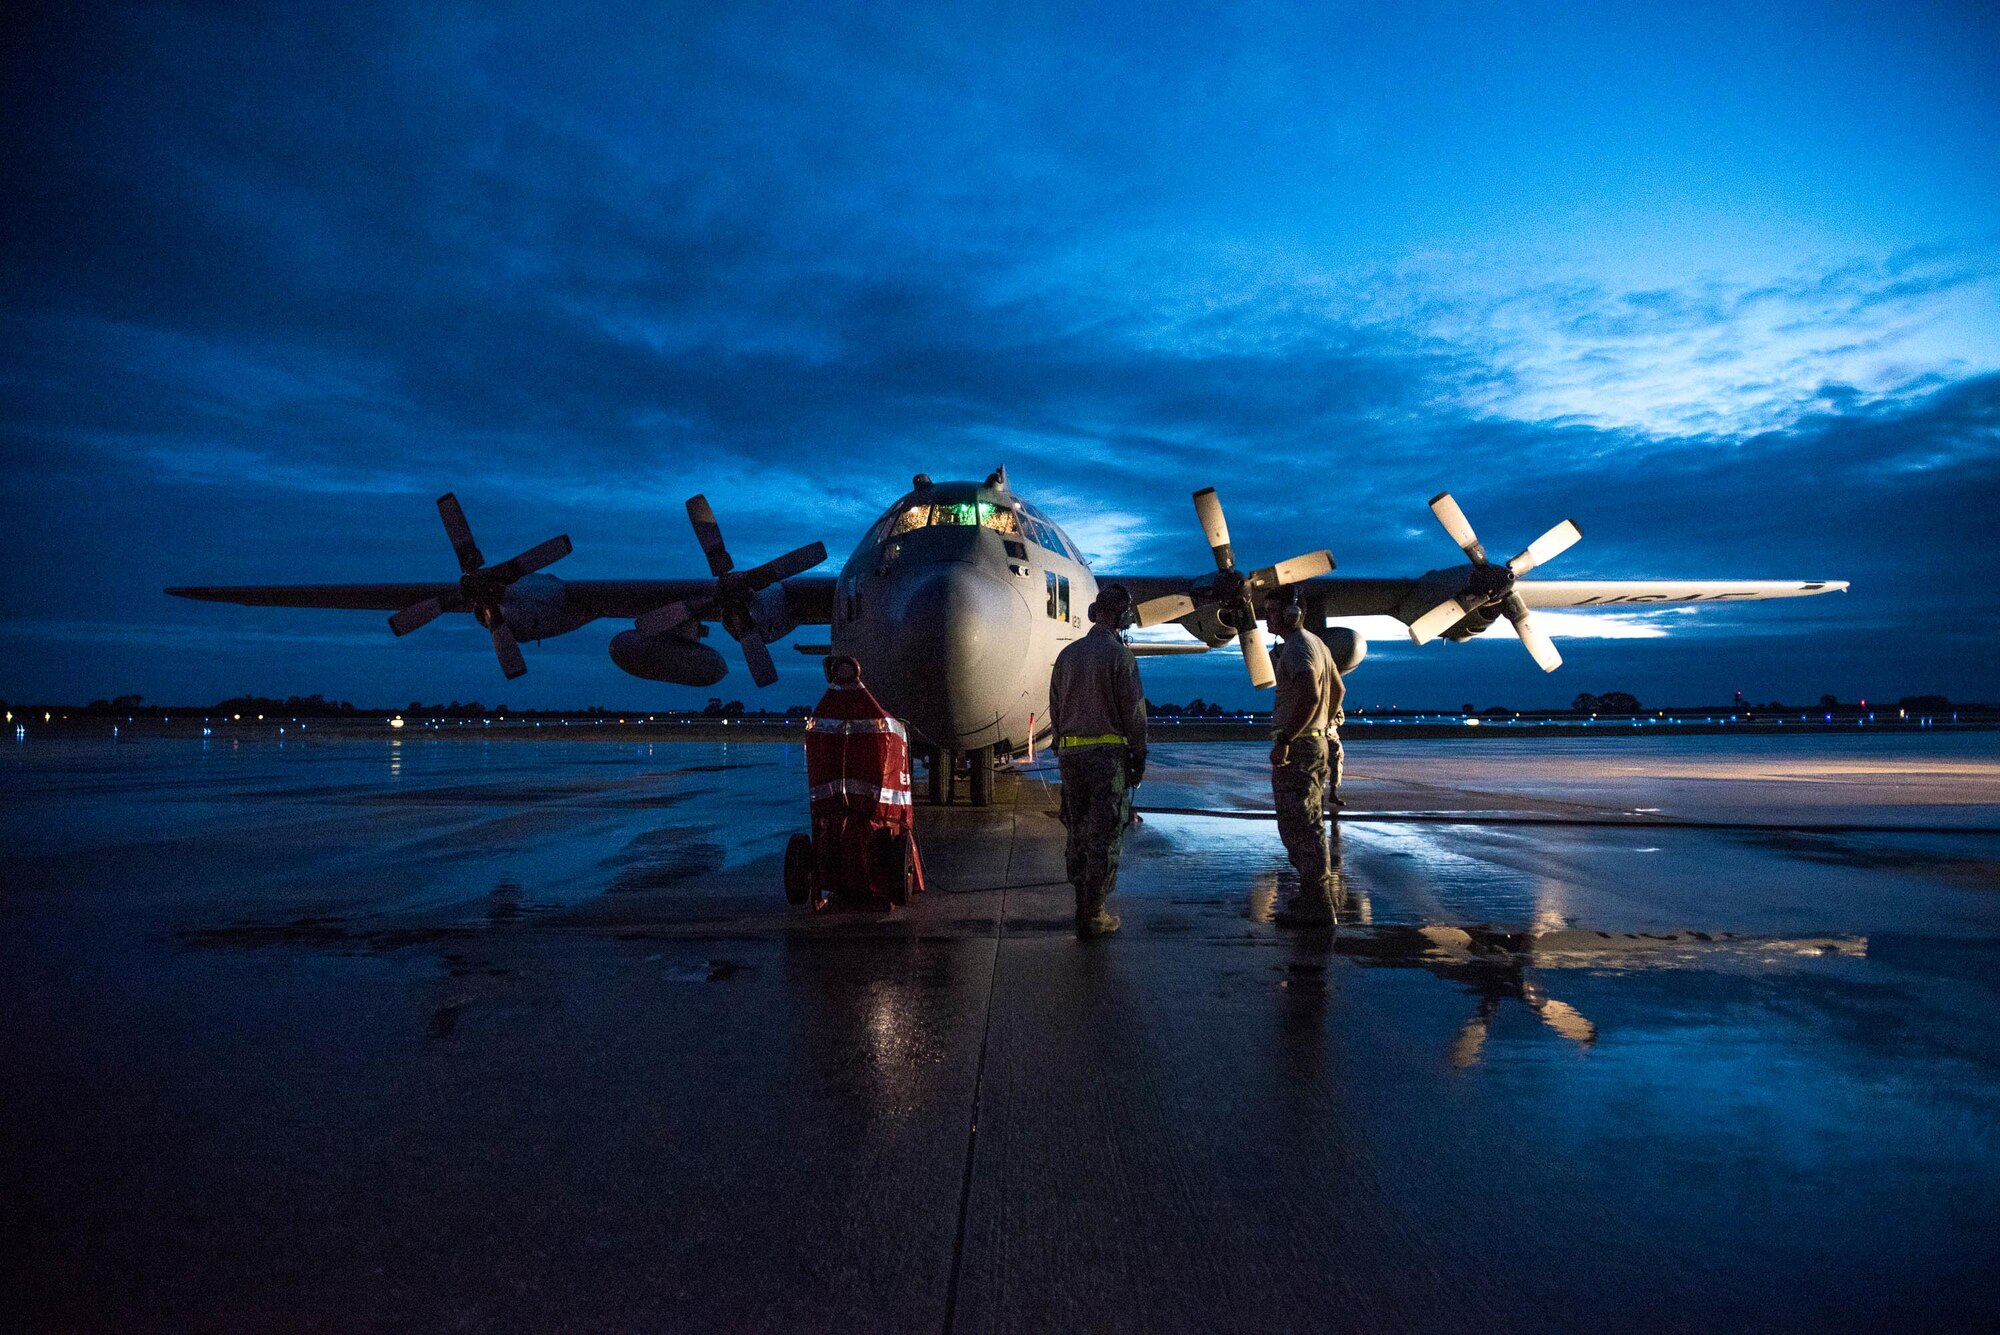 Kentucky Air National Guard crew chiefs prepare a 123rd Airlift Wing C-130 Hercules for flight at Naval Station Rota, Spain, prior to take off on April 27, 2017, during Exercise African Lion. Multiple units from the U.S. Marine Corps, U.S. Army, U.S. Navy, U.S. Air Force and the Kentucky and Utah Air National Guards conducted multilateral and stability operations training with units from the Royal Moroccan Armed Forces in the Kingdom of Morocco during the exercise, which ran from April 19 to 28. The annual combined multilateral exercise is designed to improve interoperability and mutual understanding of each nation’s tactics, techniques and procedures while demonstrating the strong bond between the nations’ militaries. (U.S. Air Force photo by Master Sgt. Phil Speck)